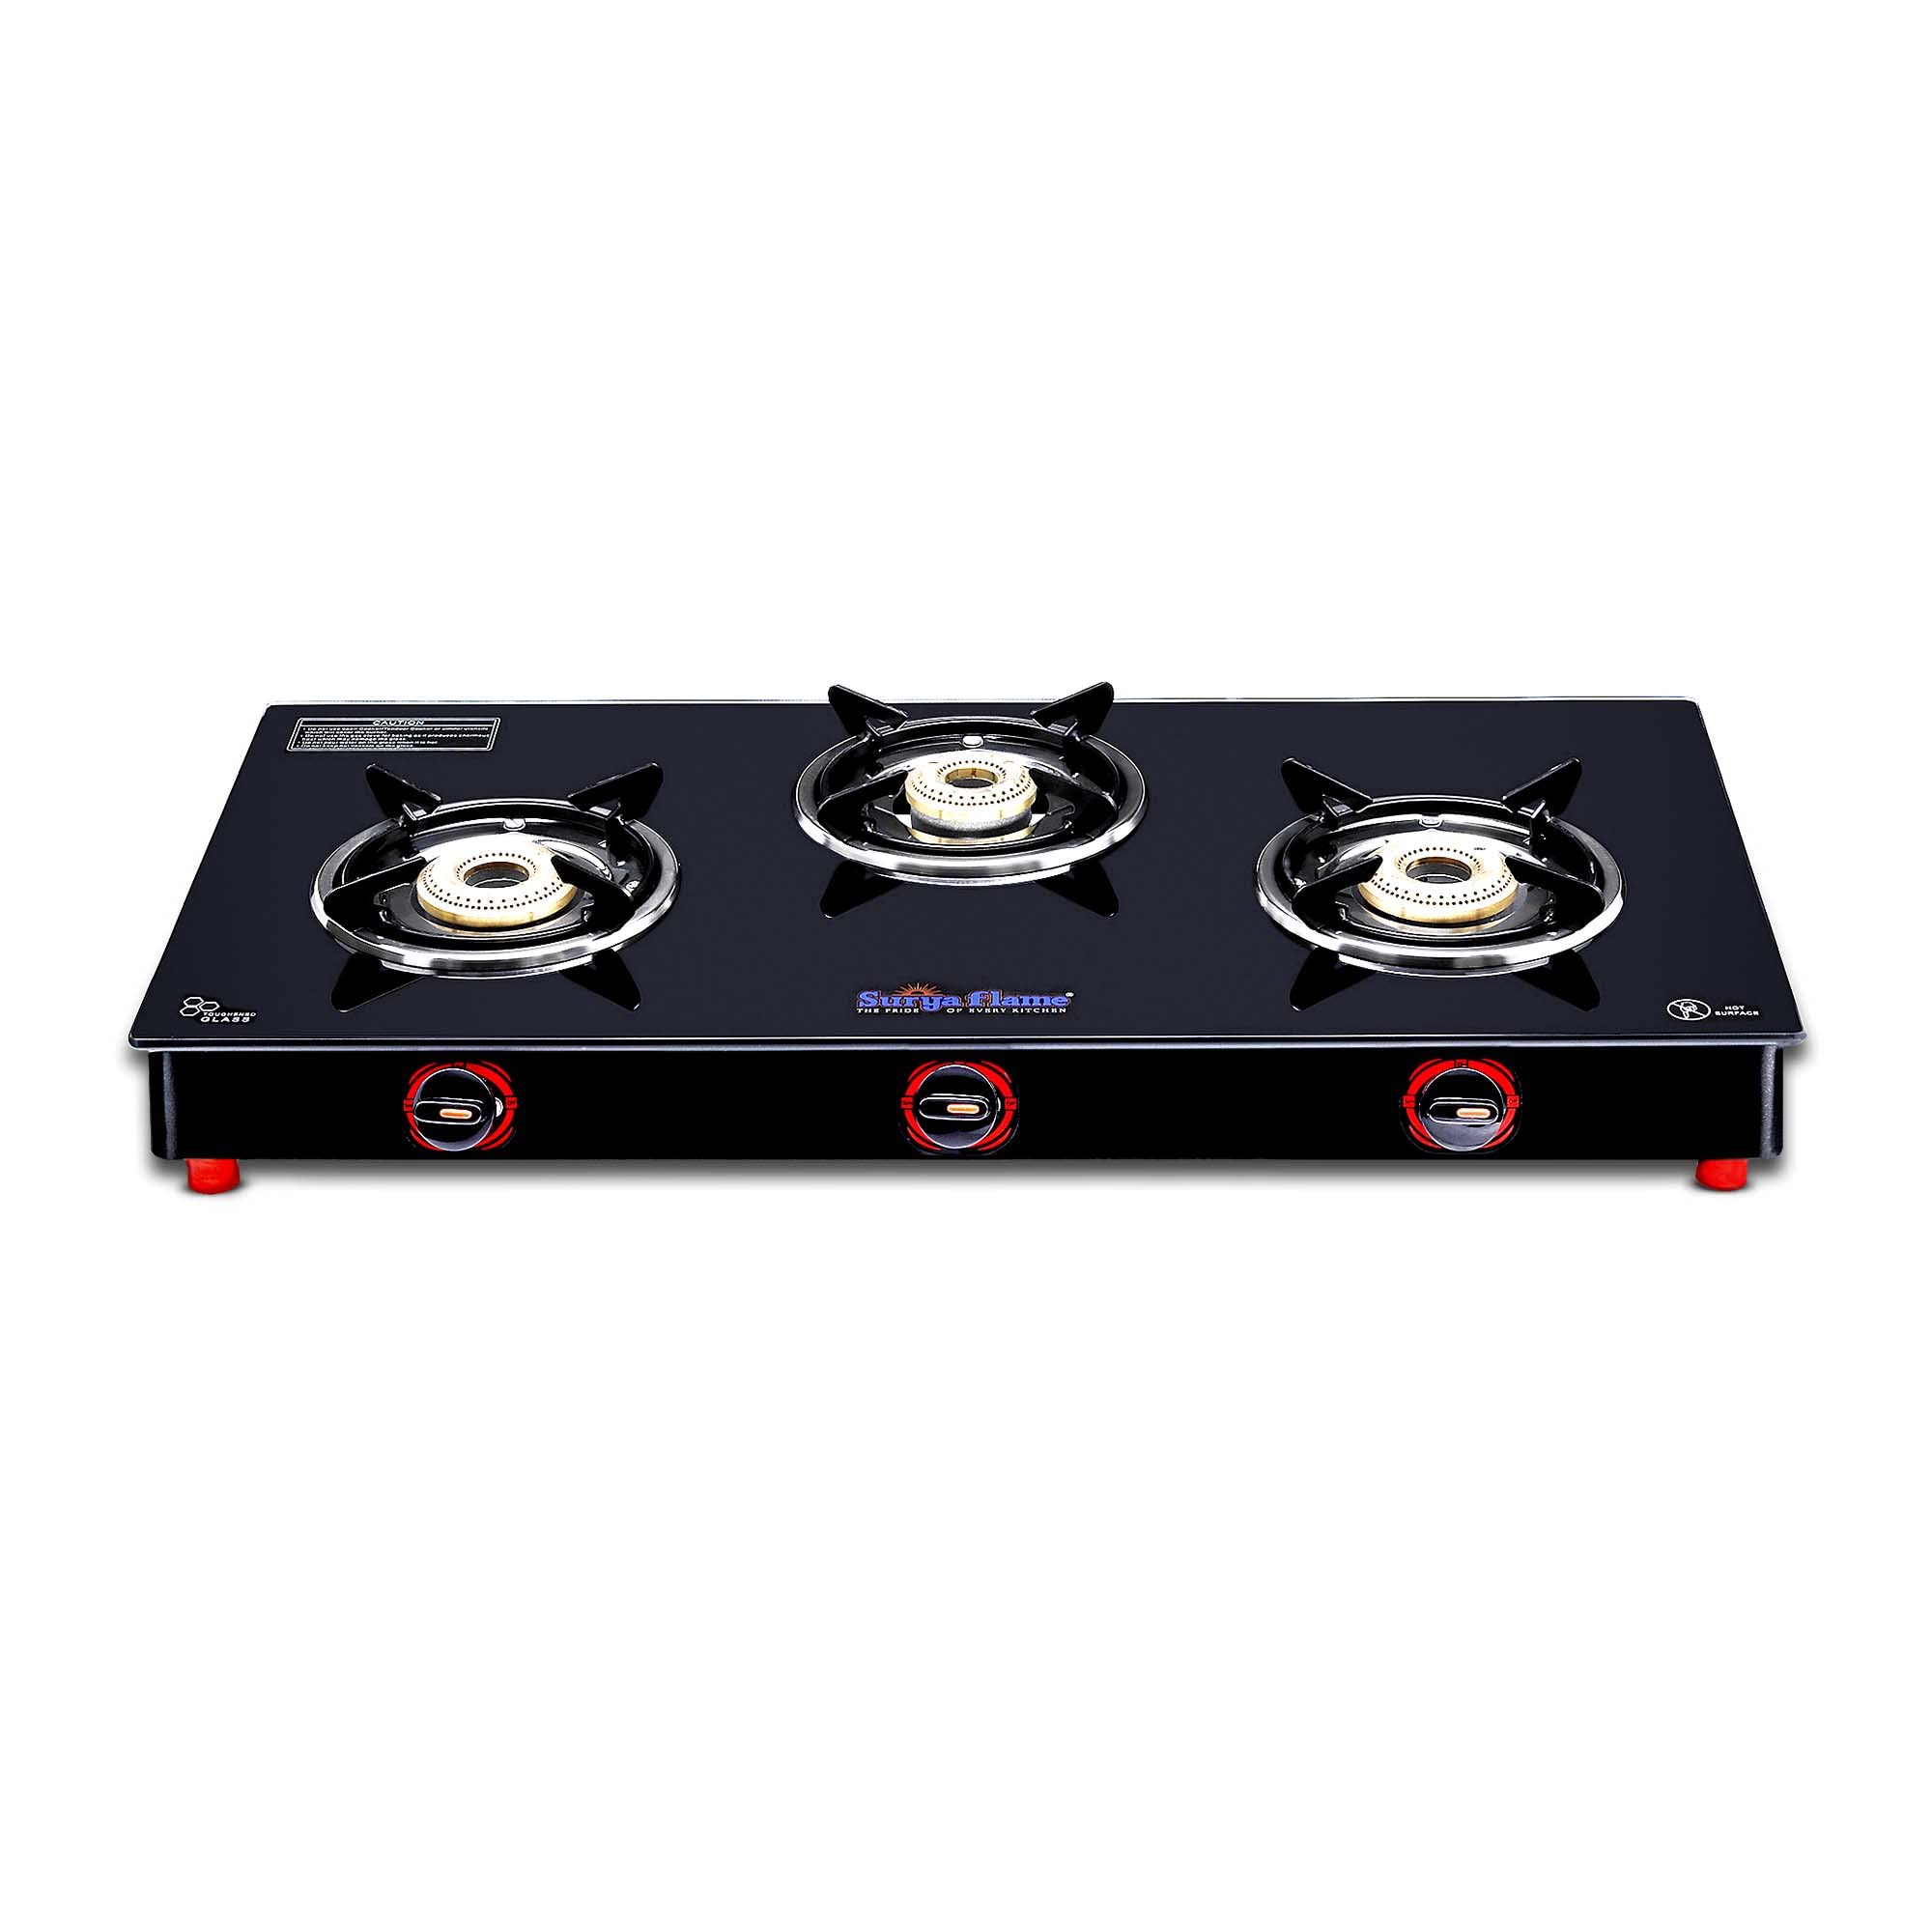 Surya Flame Alpha Gas Stove 3 Burner Glass Top | India's First ISI Certifed Black Body PNG Stove | Direct Use For Pipeline Gas - 2 Years Complete Doorstep Warranty